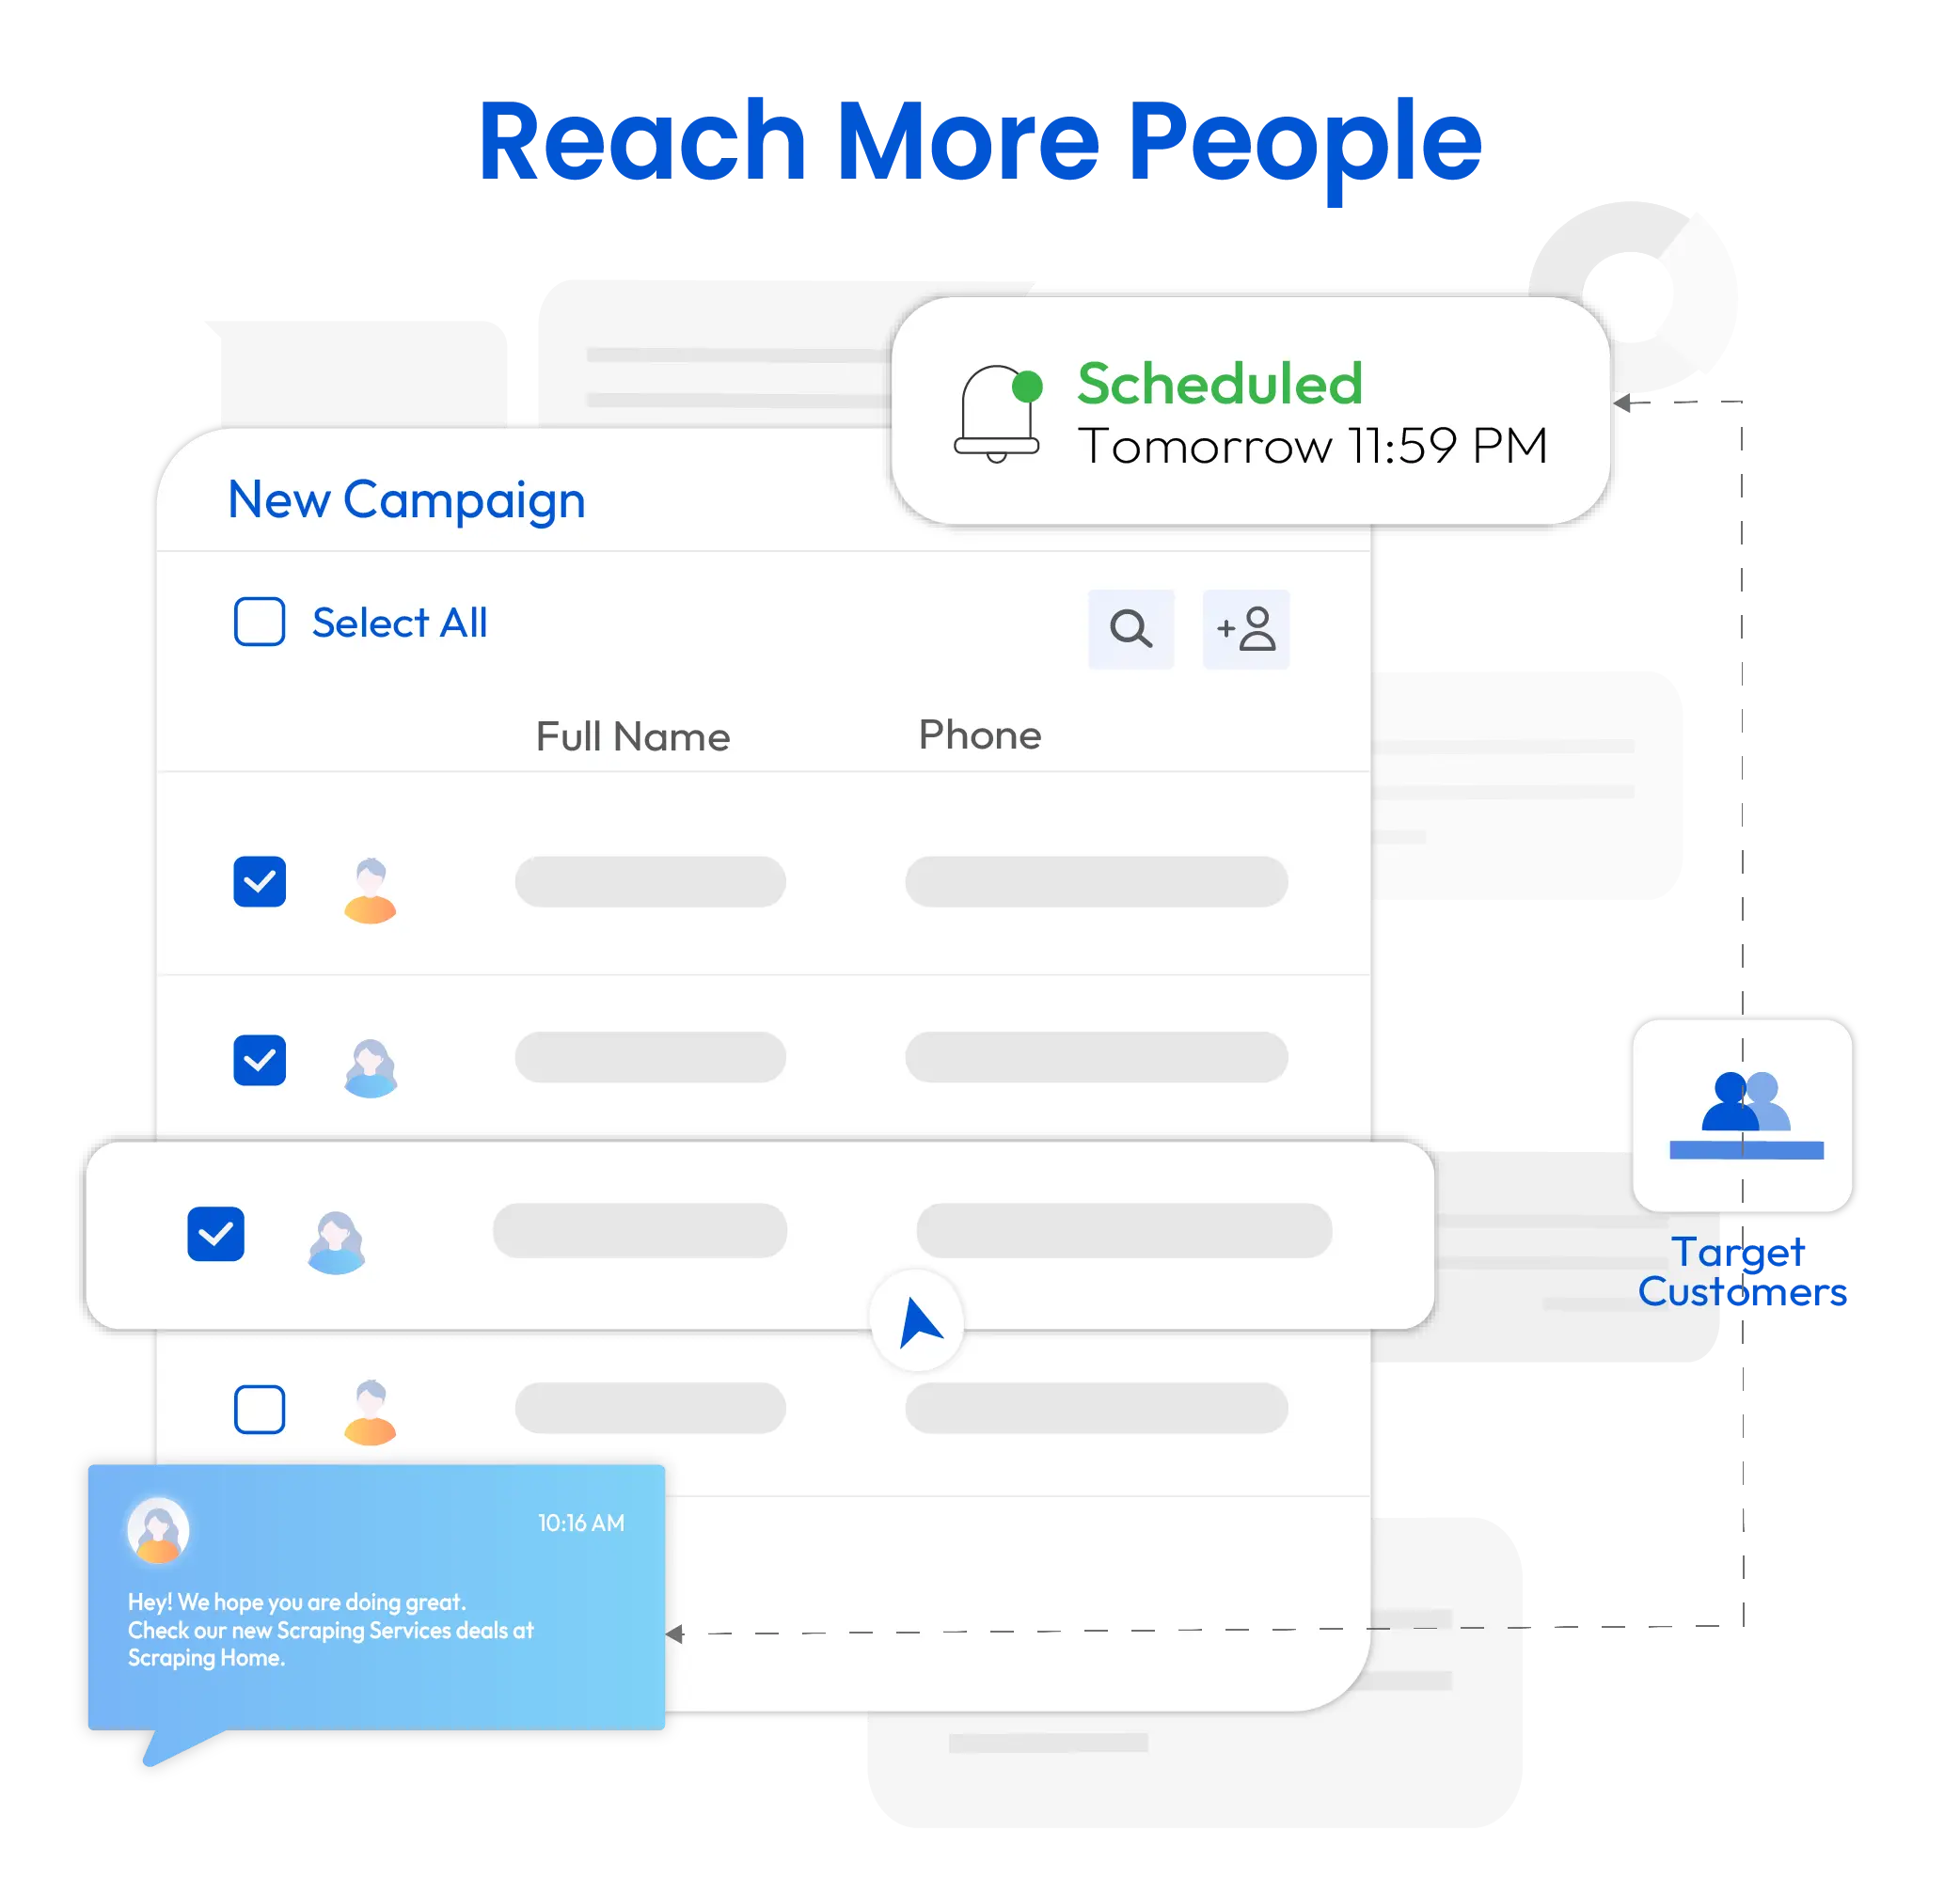 Reach more people with personalized messages